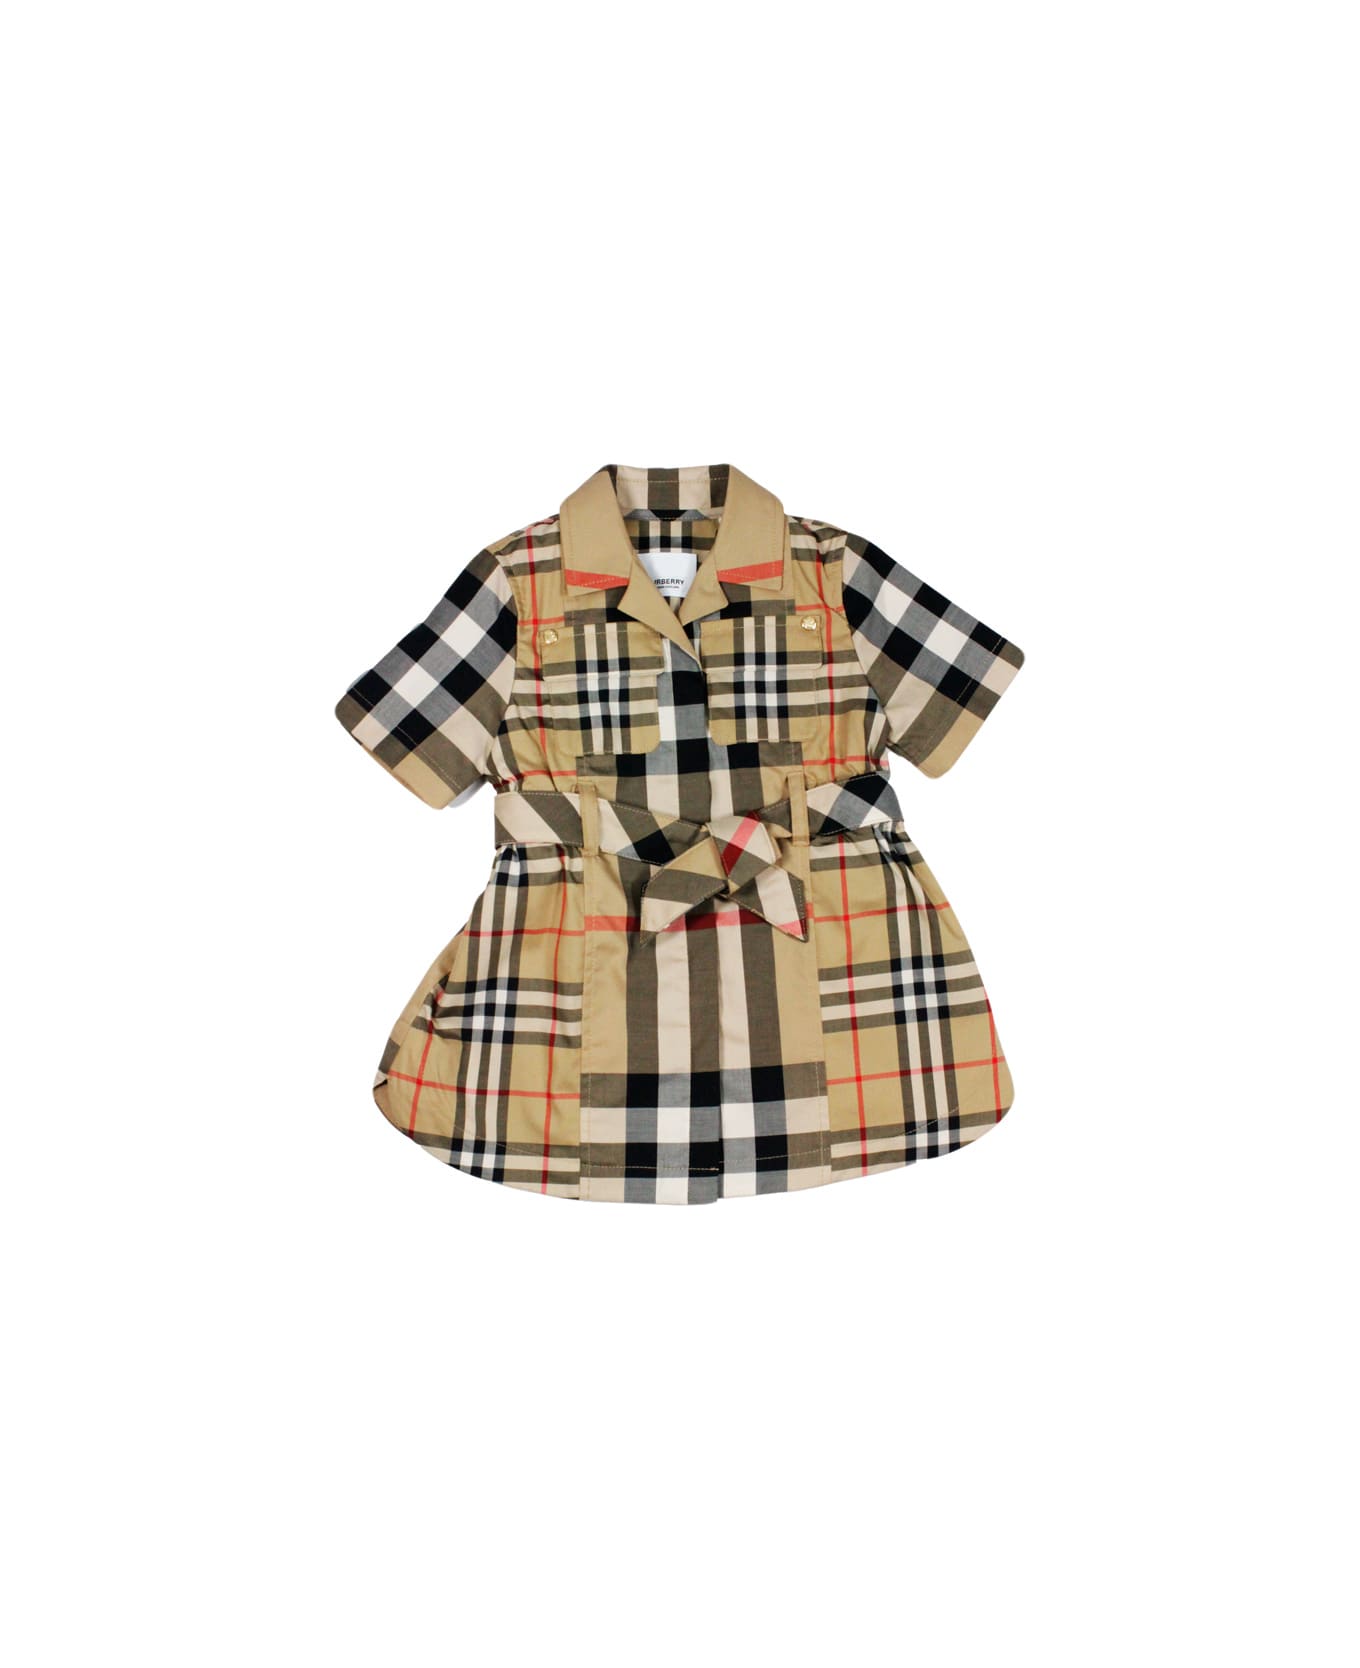 Burberry Short-sleeved Cotton Dress With Tartan Check Pattern And Button Closure On The Front - Beige